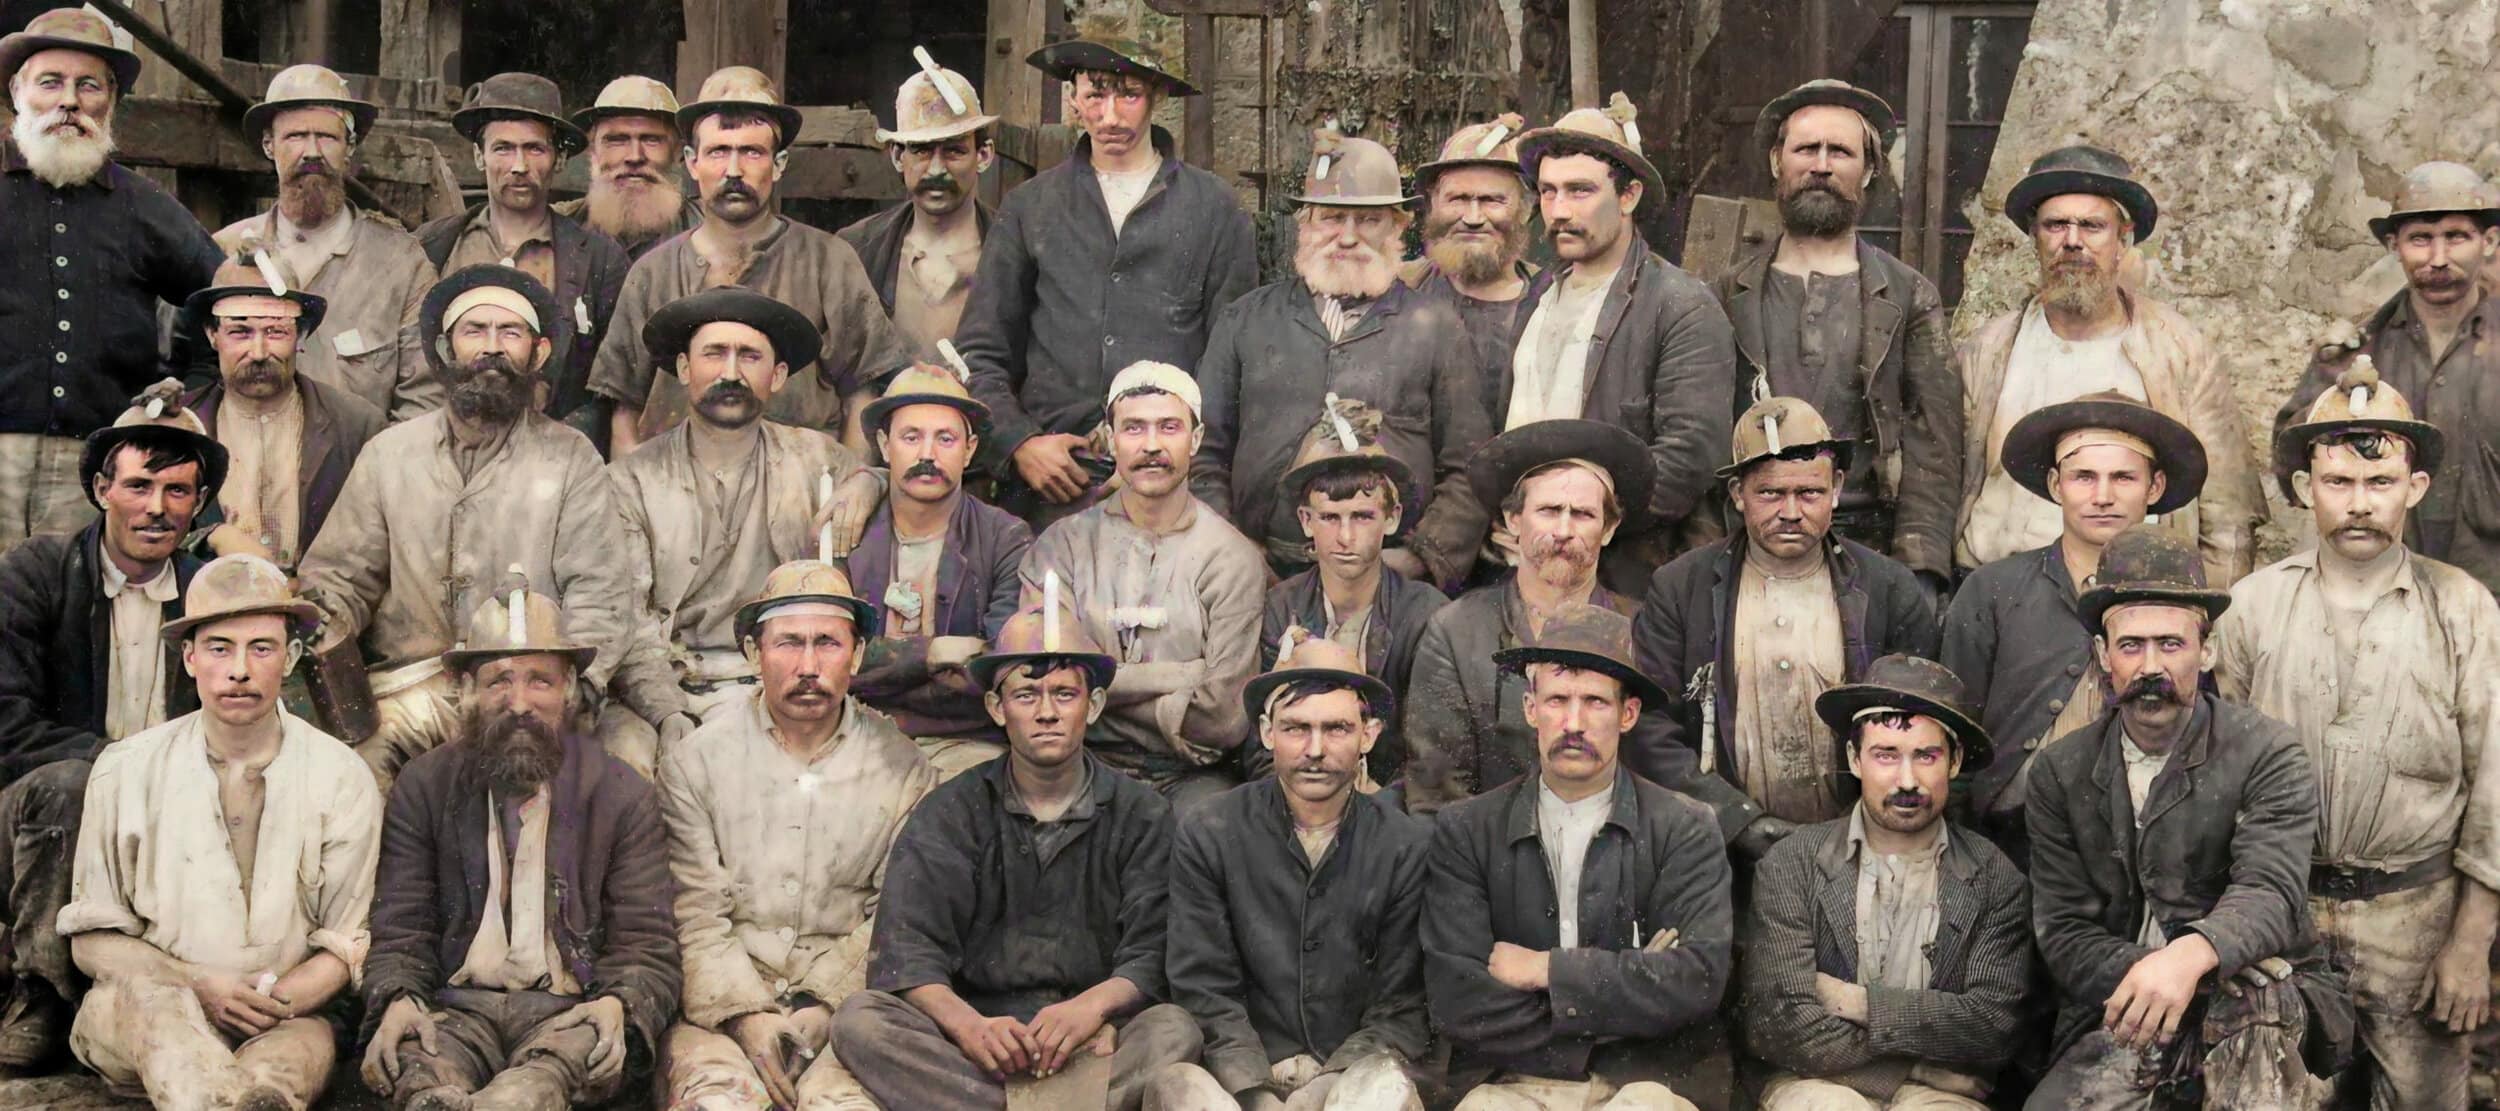 Lots of Cornish miners migrated to work in the Moonta Mine, Australia